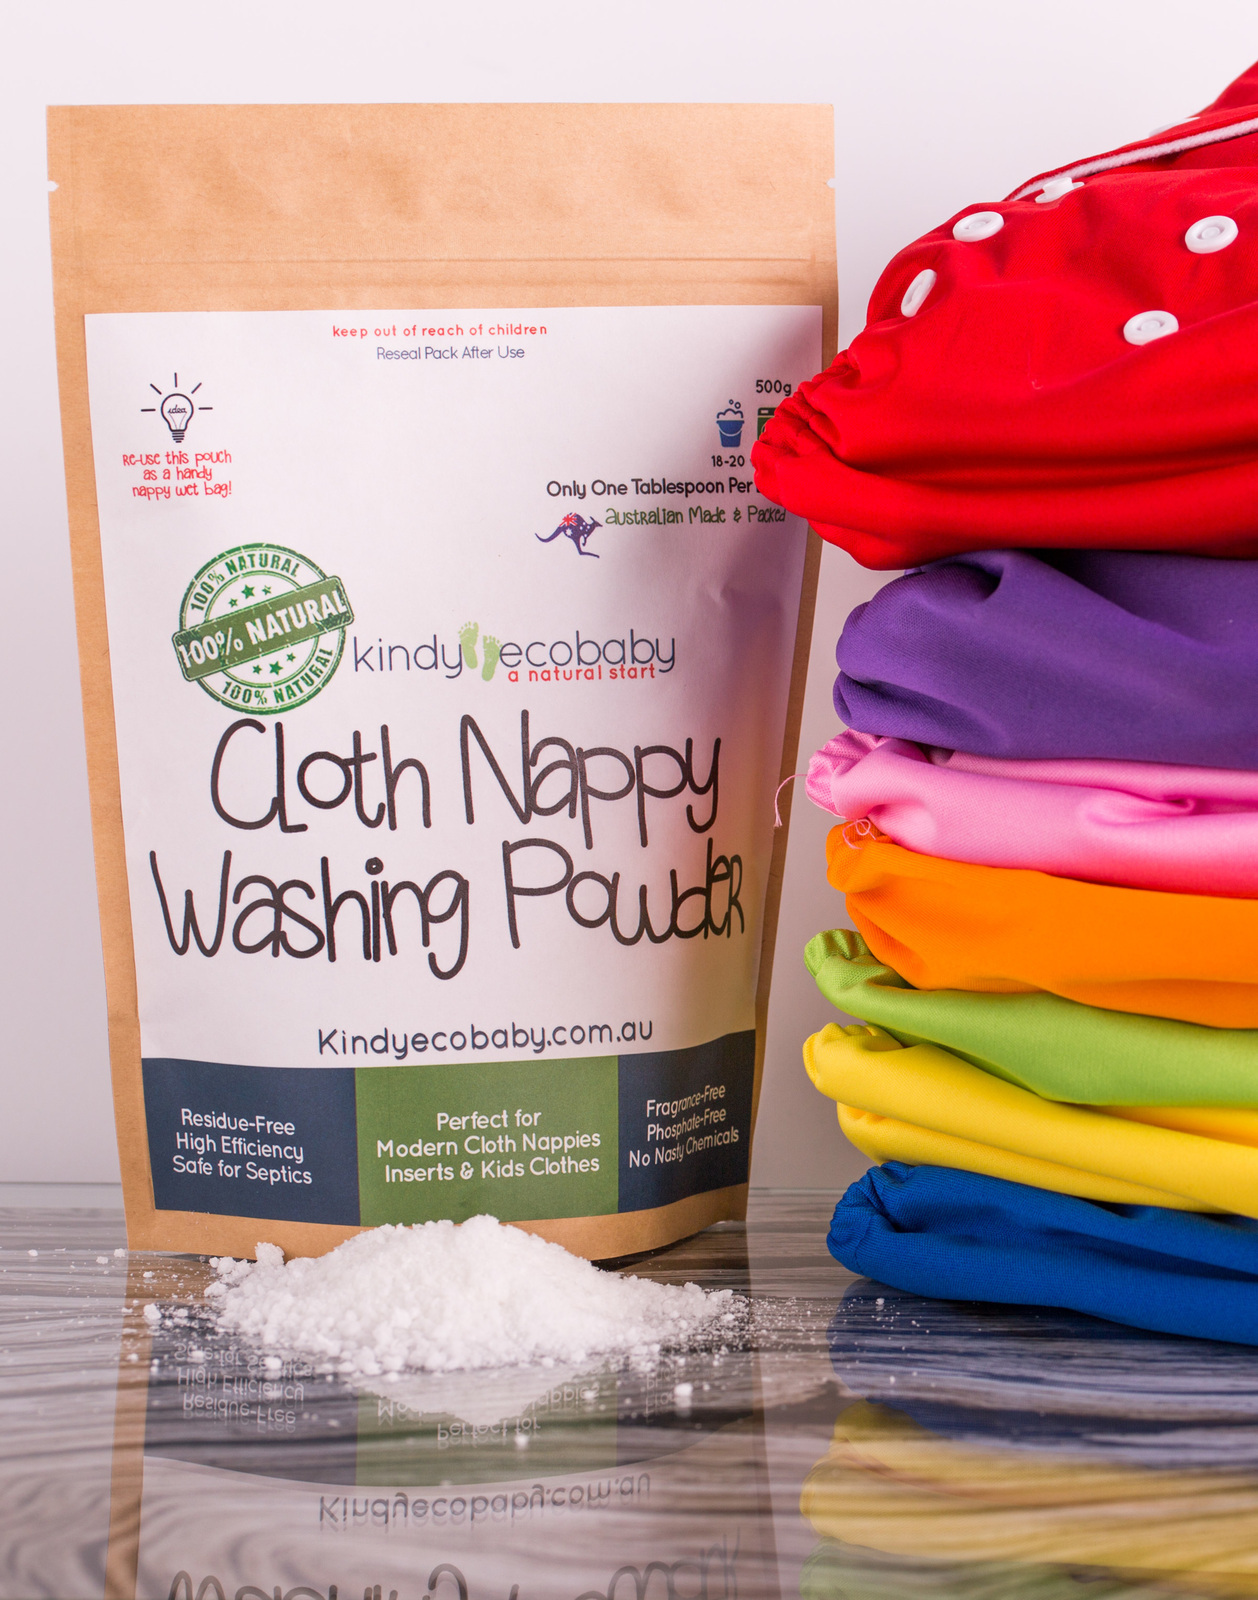 A bag of Kindy Ecobaby Cloth Nappy Washing Powder next to a neat pile of seven modern cloth nappies which are red, purple, orange, pink, yellow, blue and green